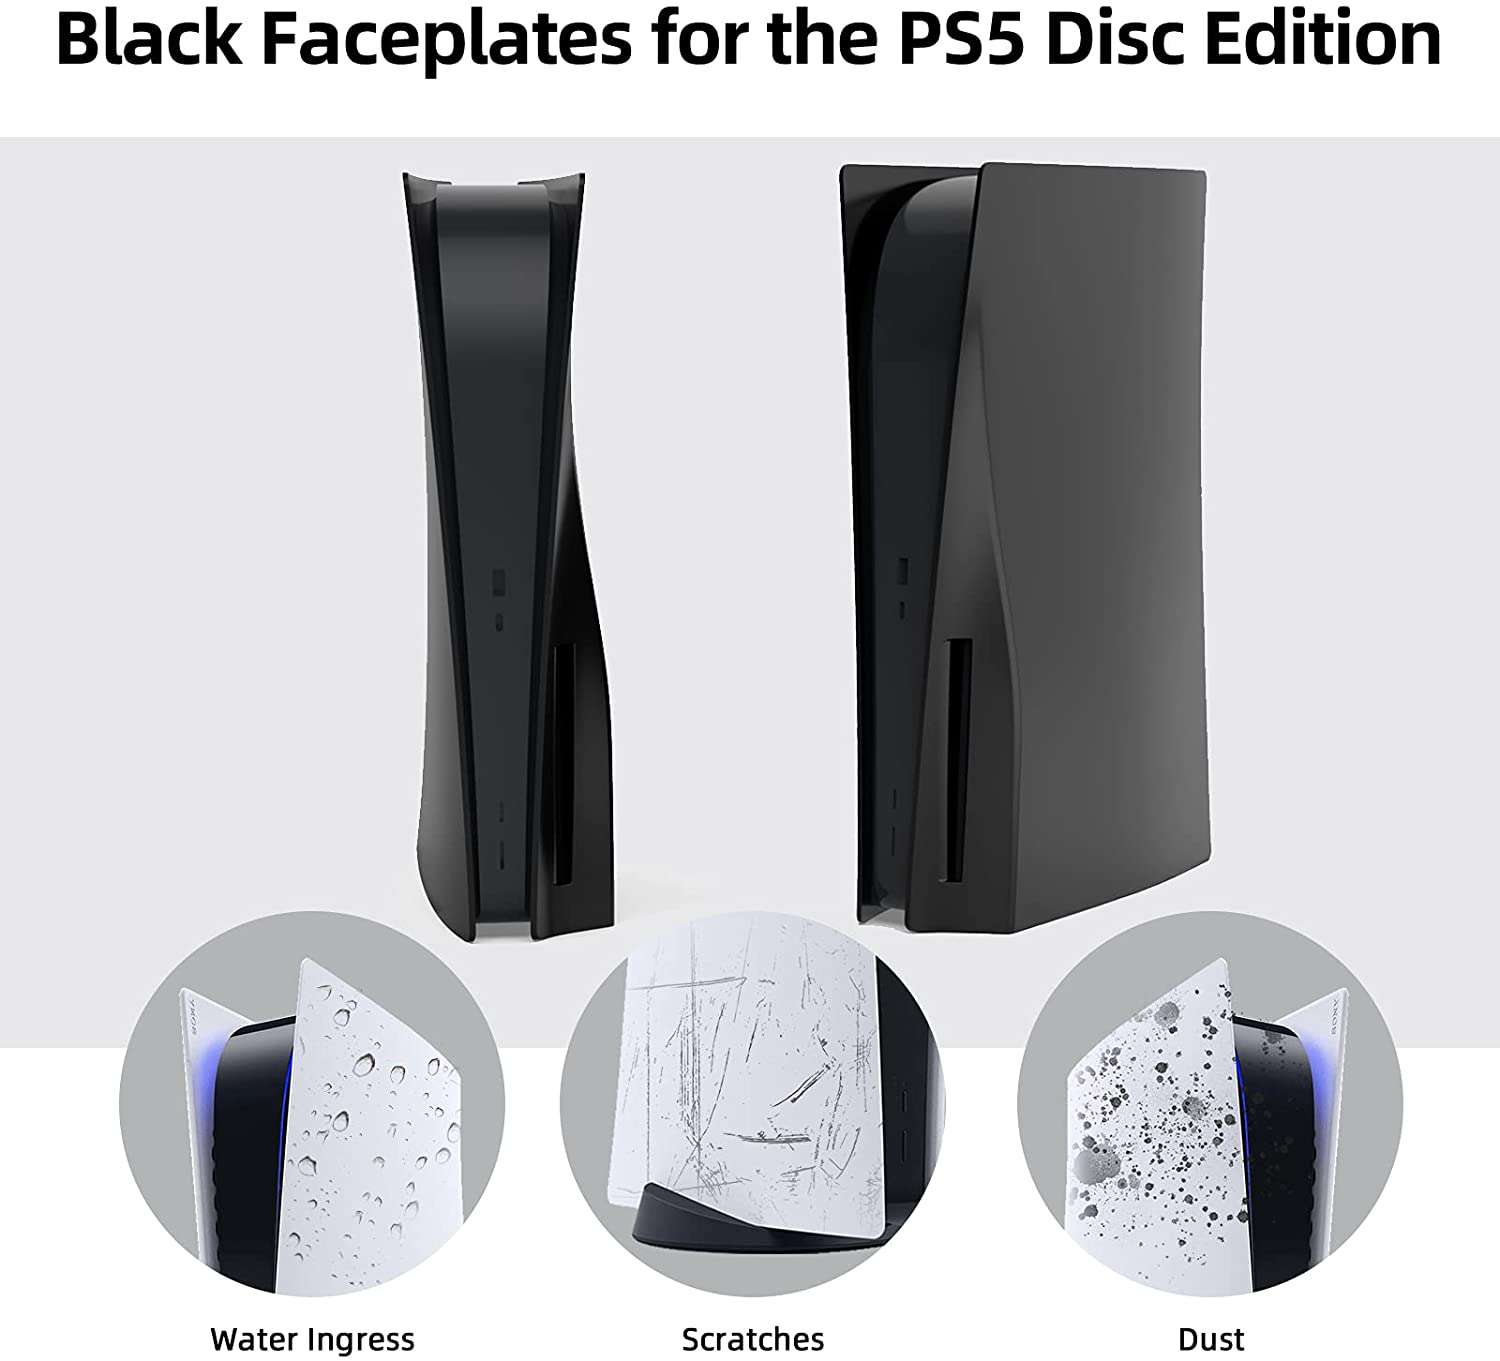 Black faceplates on PS5 resist water, scratches, and dust better than original ones.